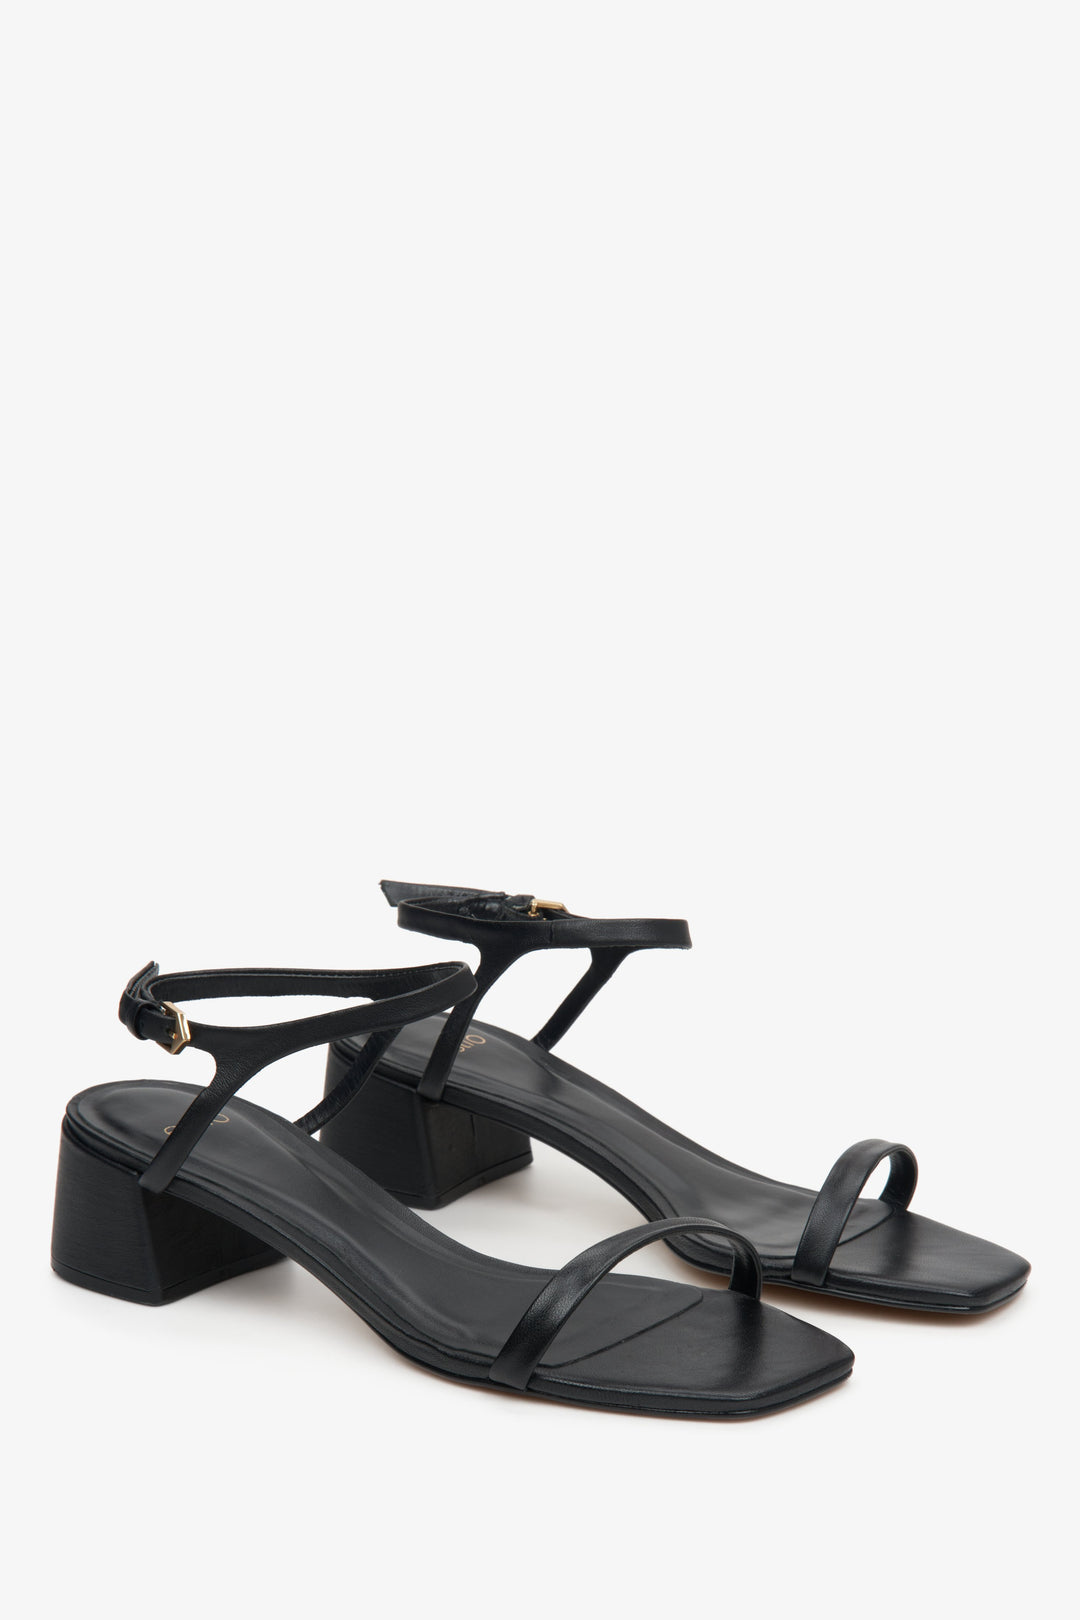 Lightweight, women's black sandals made of genuine leather with a sturdy heel by Estro.